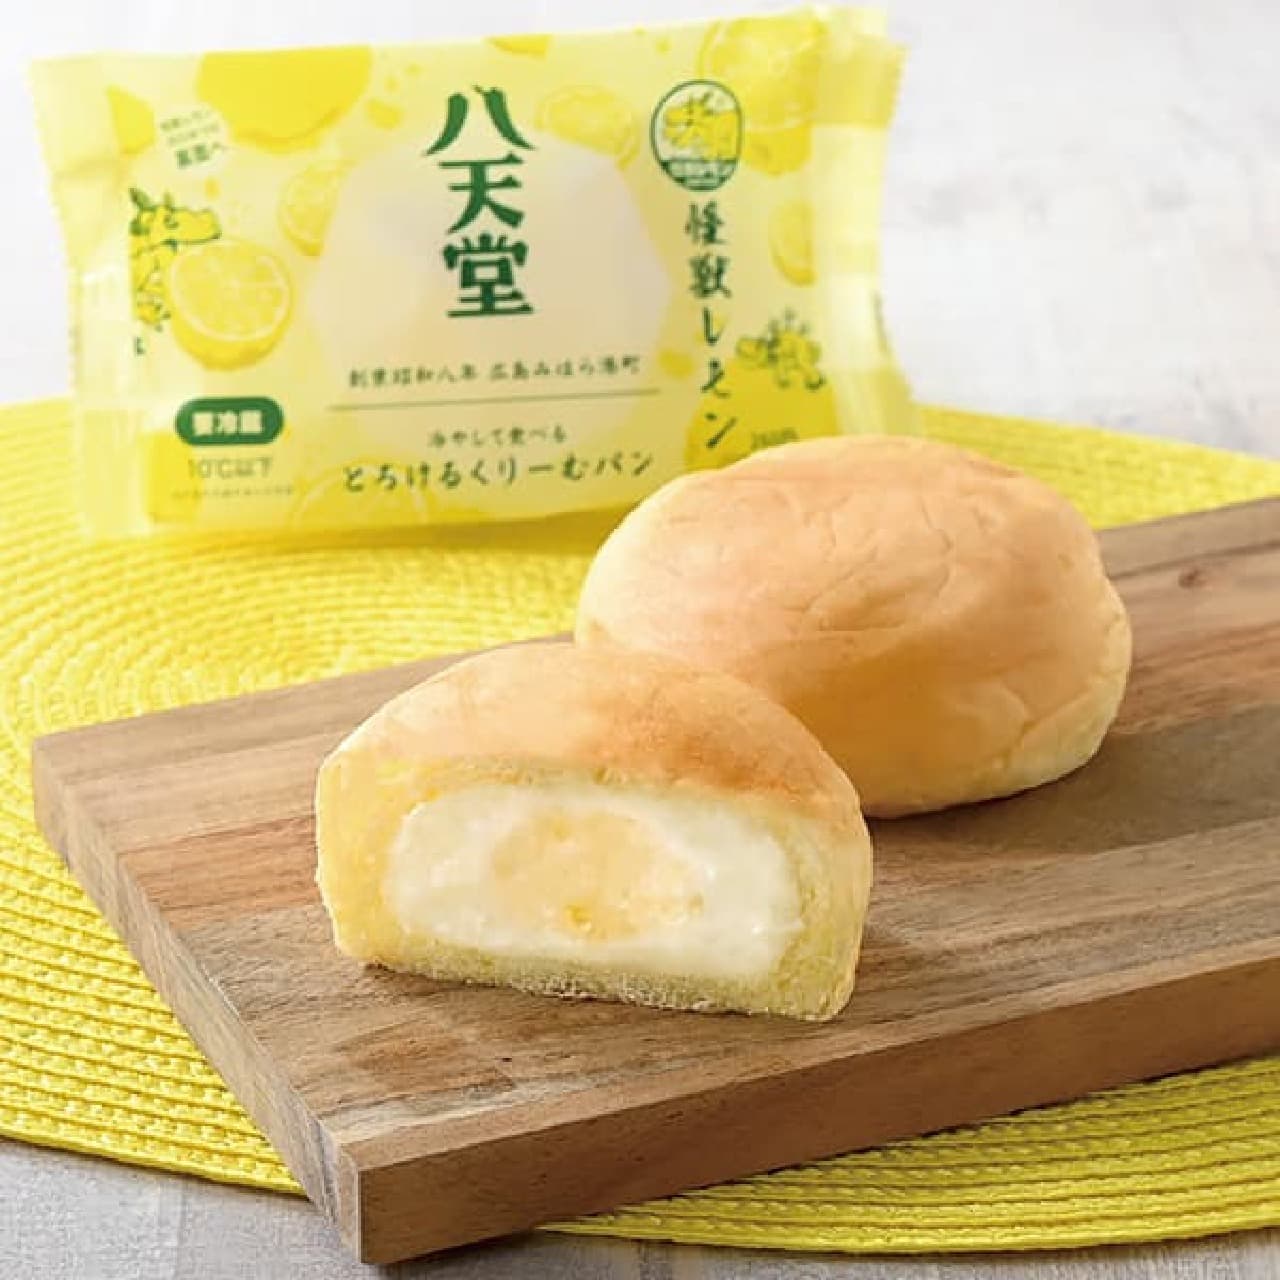 FamilyMart "Chilled Melted Creamy Buns with Monster Lemon